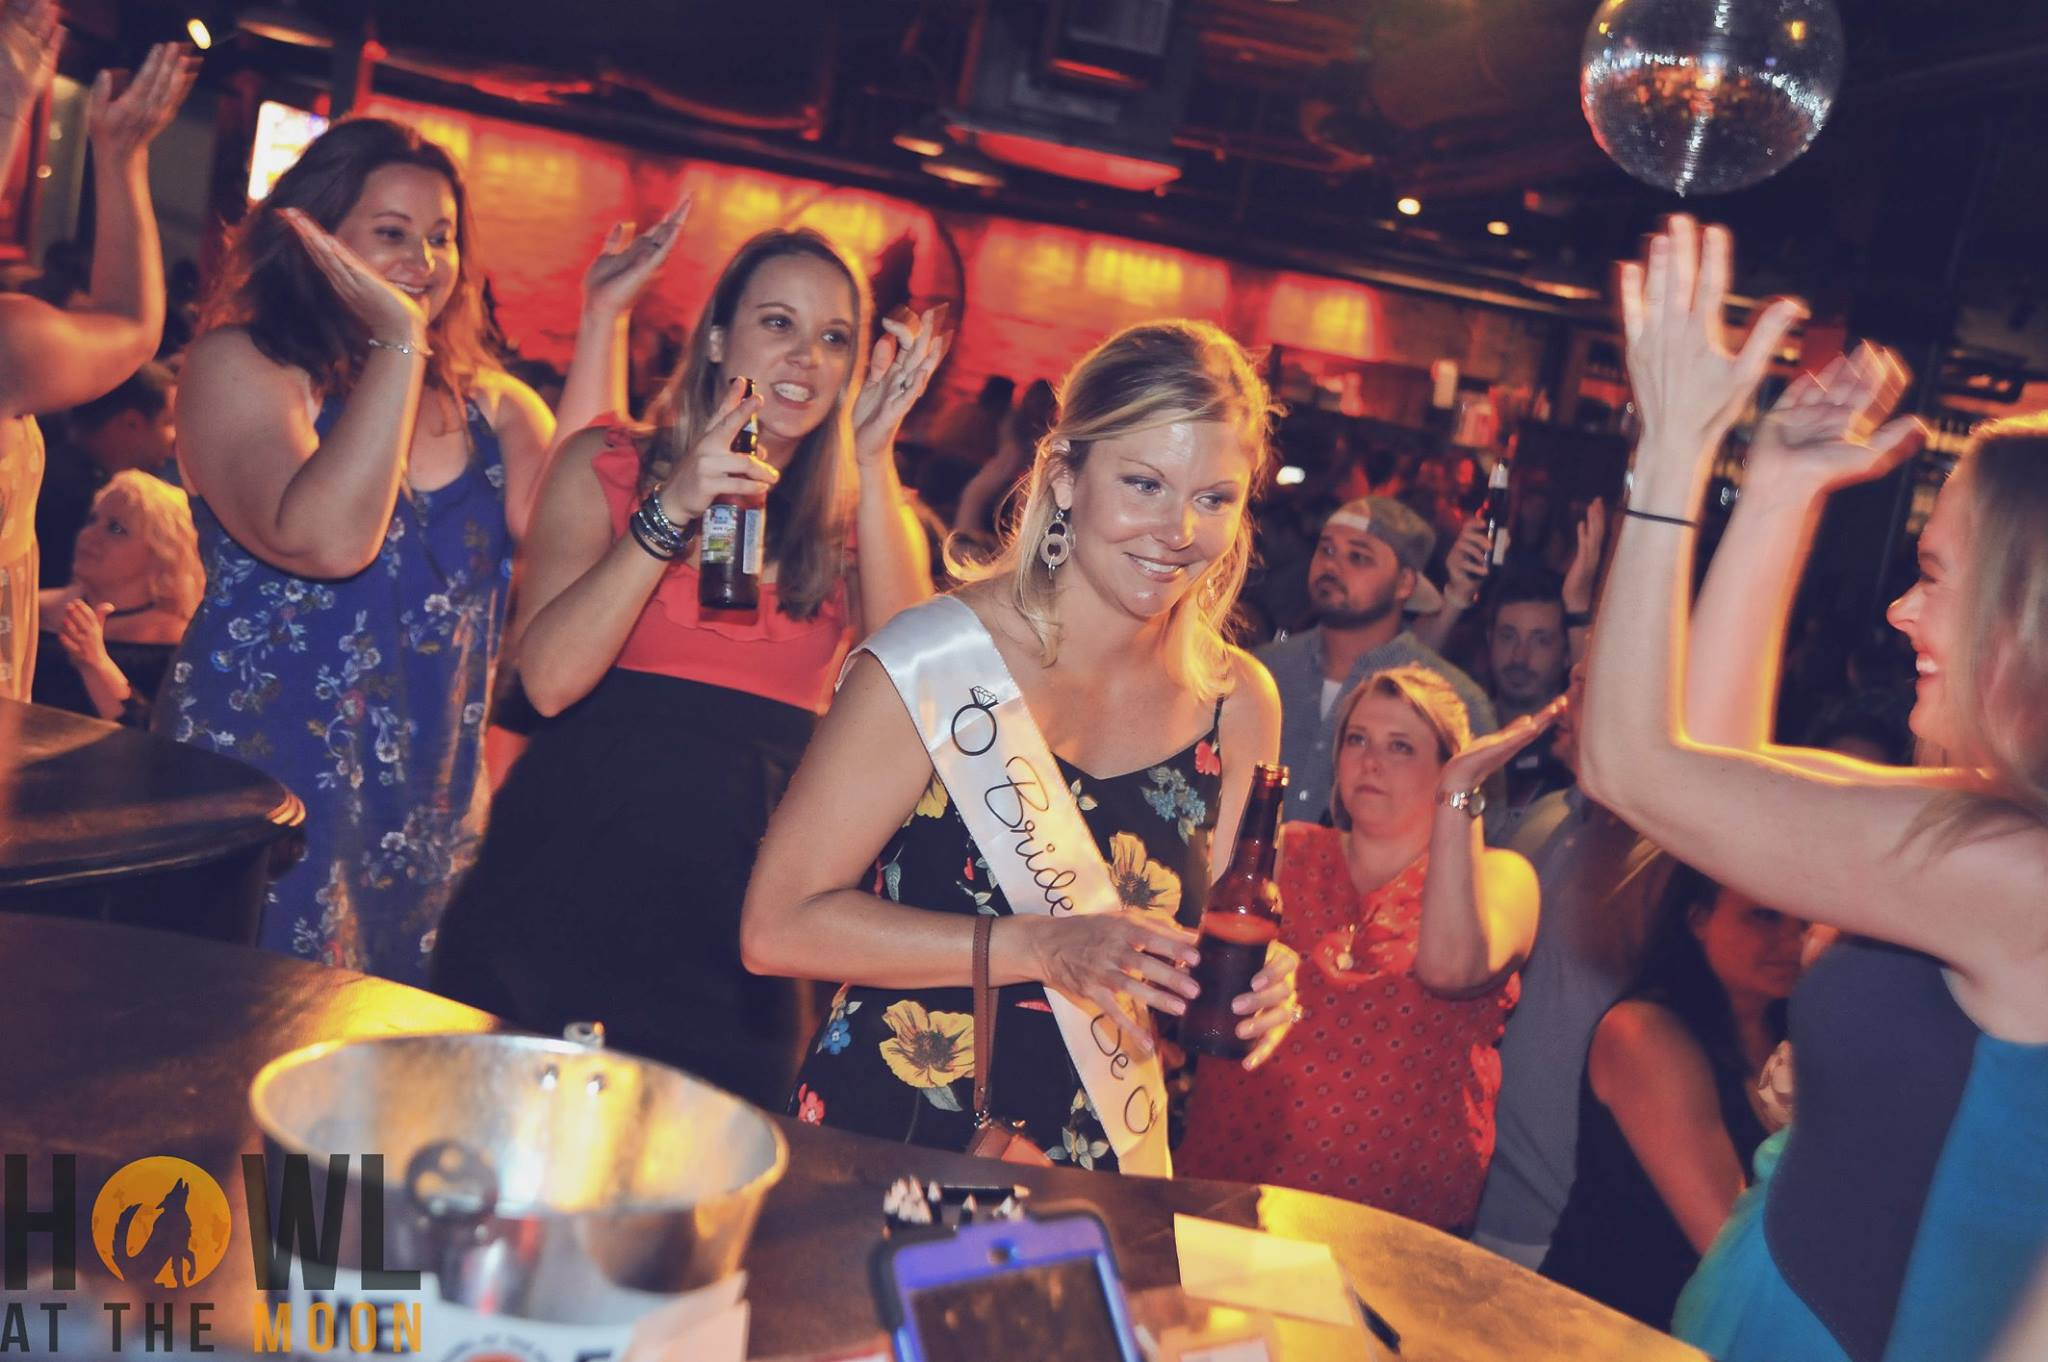 San Antonio Bachelorette Party Ideas
 Beginners Guide to Planning a Bachelorette Party